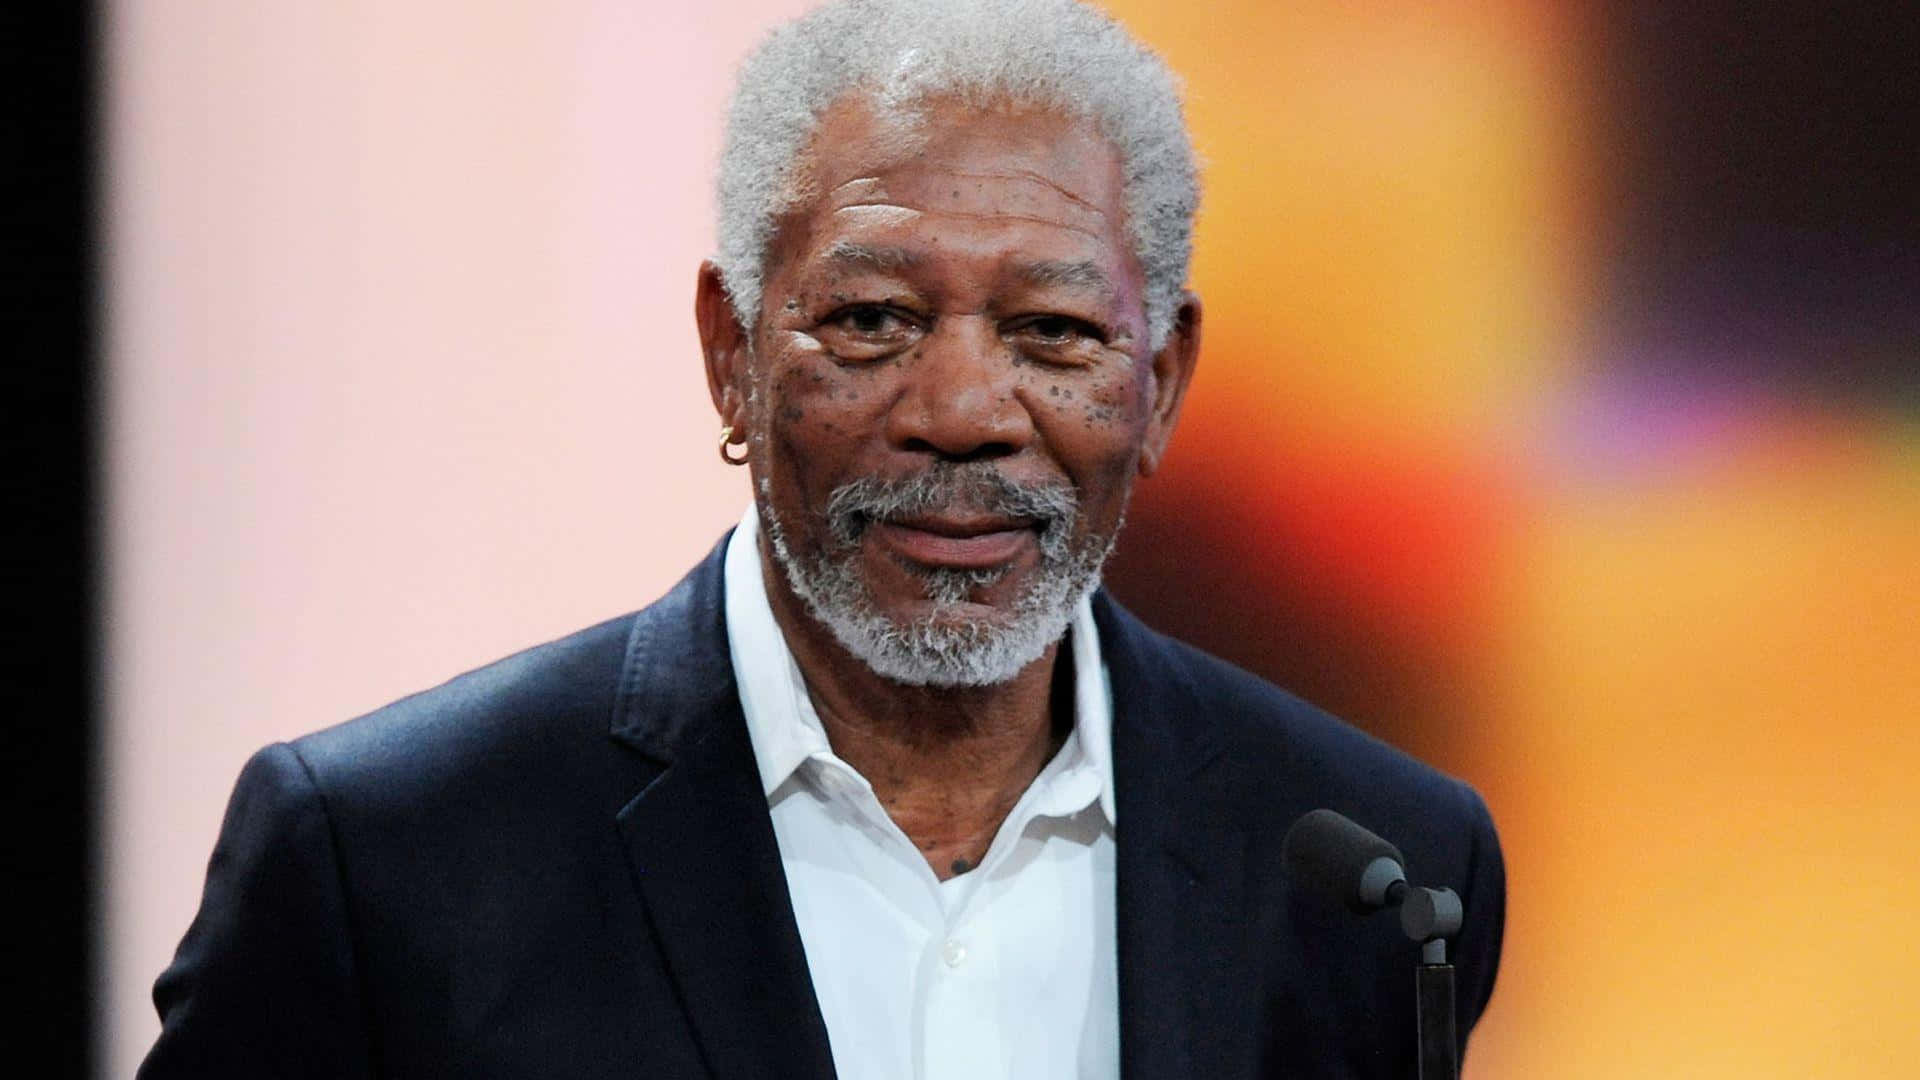 Morgan Freeman Is A Man In A Suit And Tie